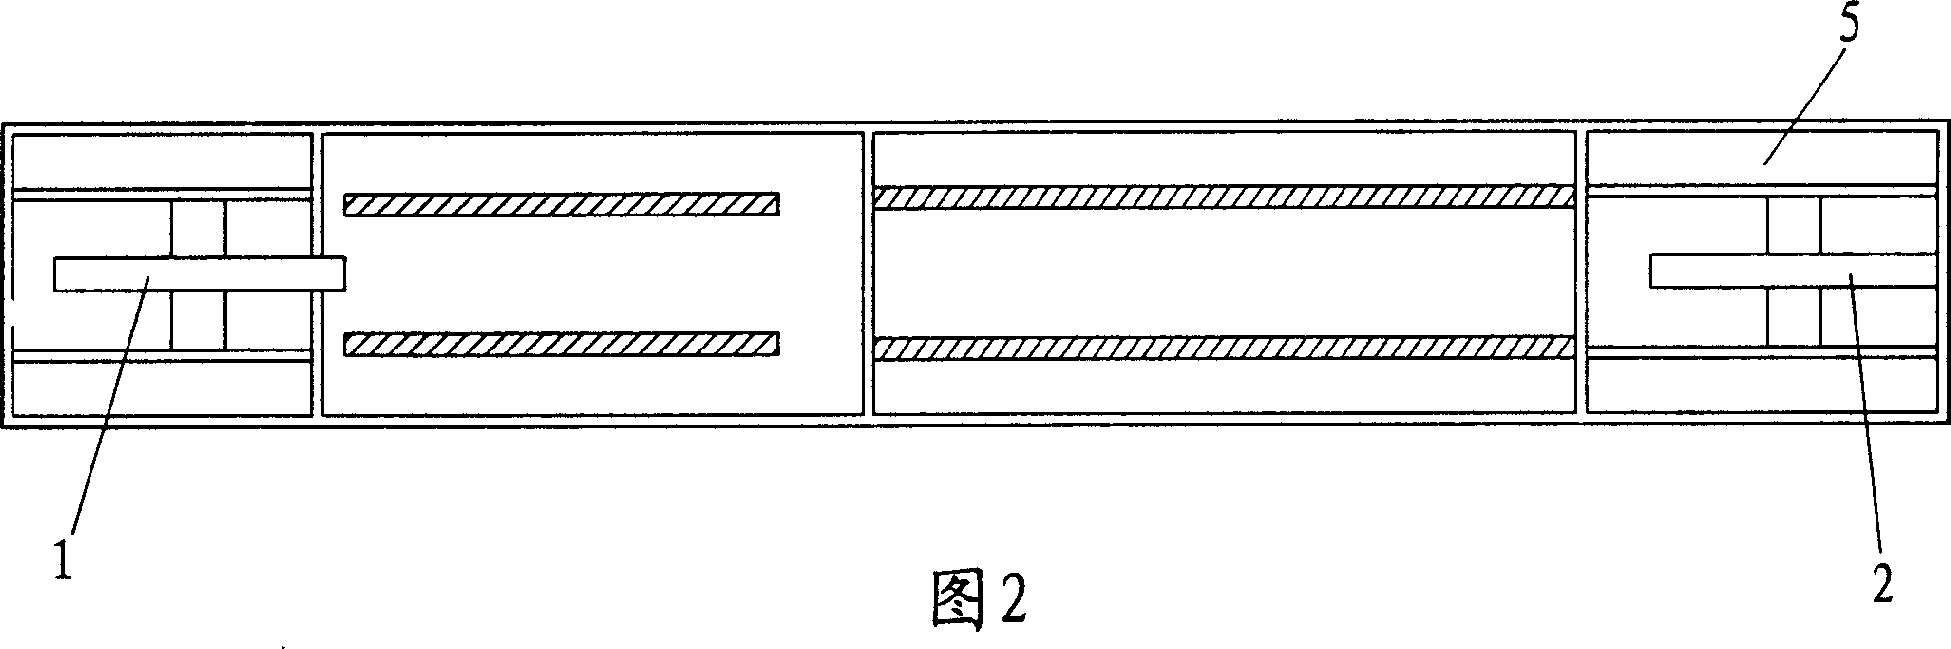 Modular sleeve forming method and its device